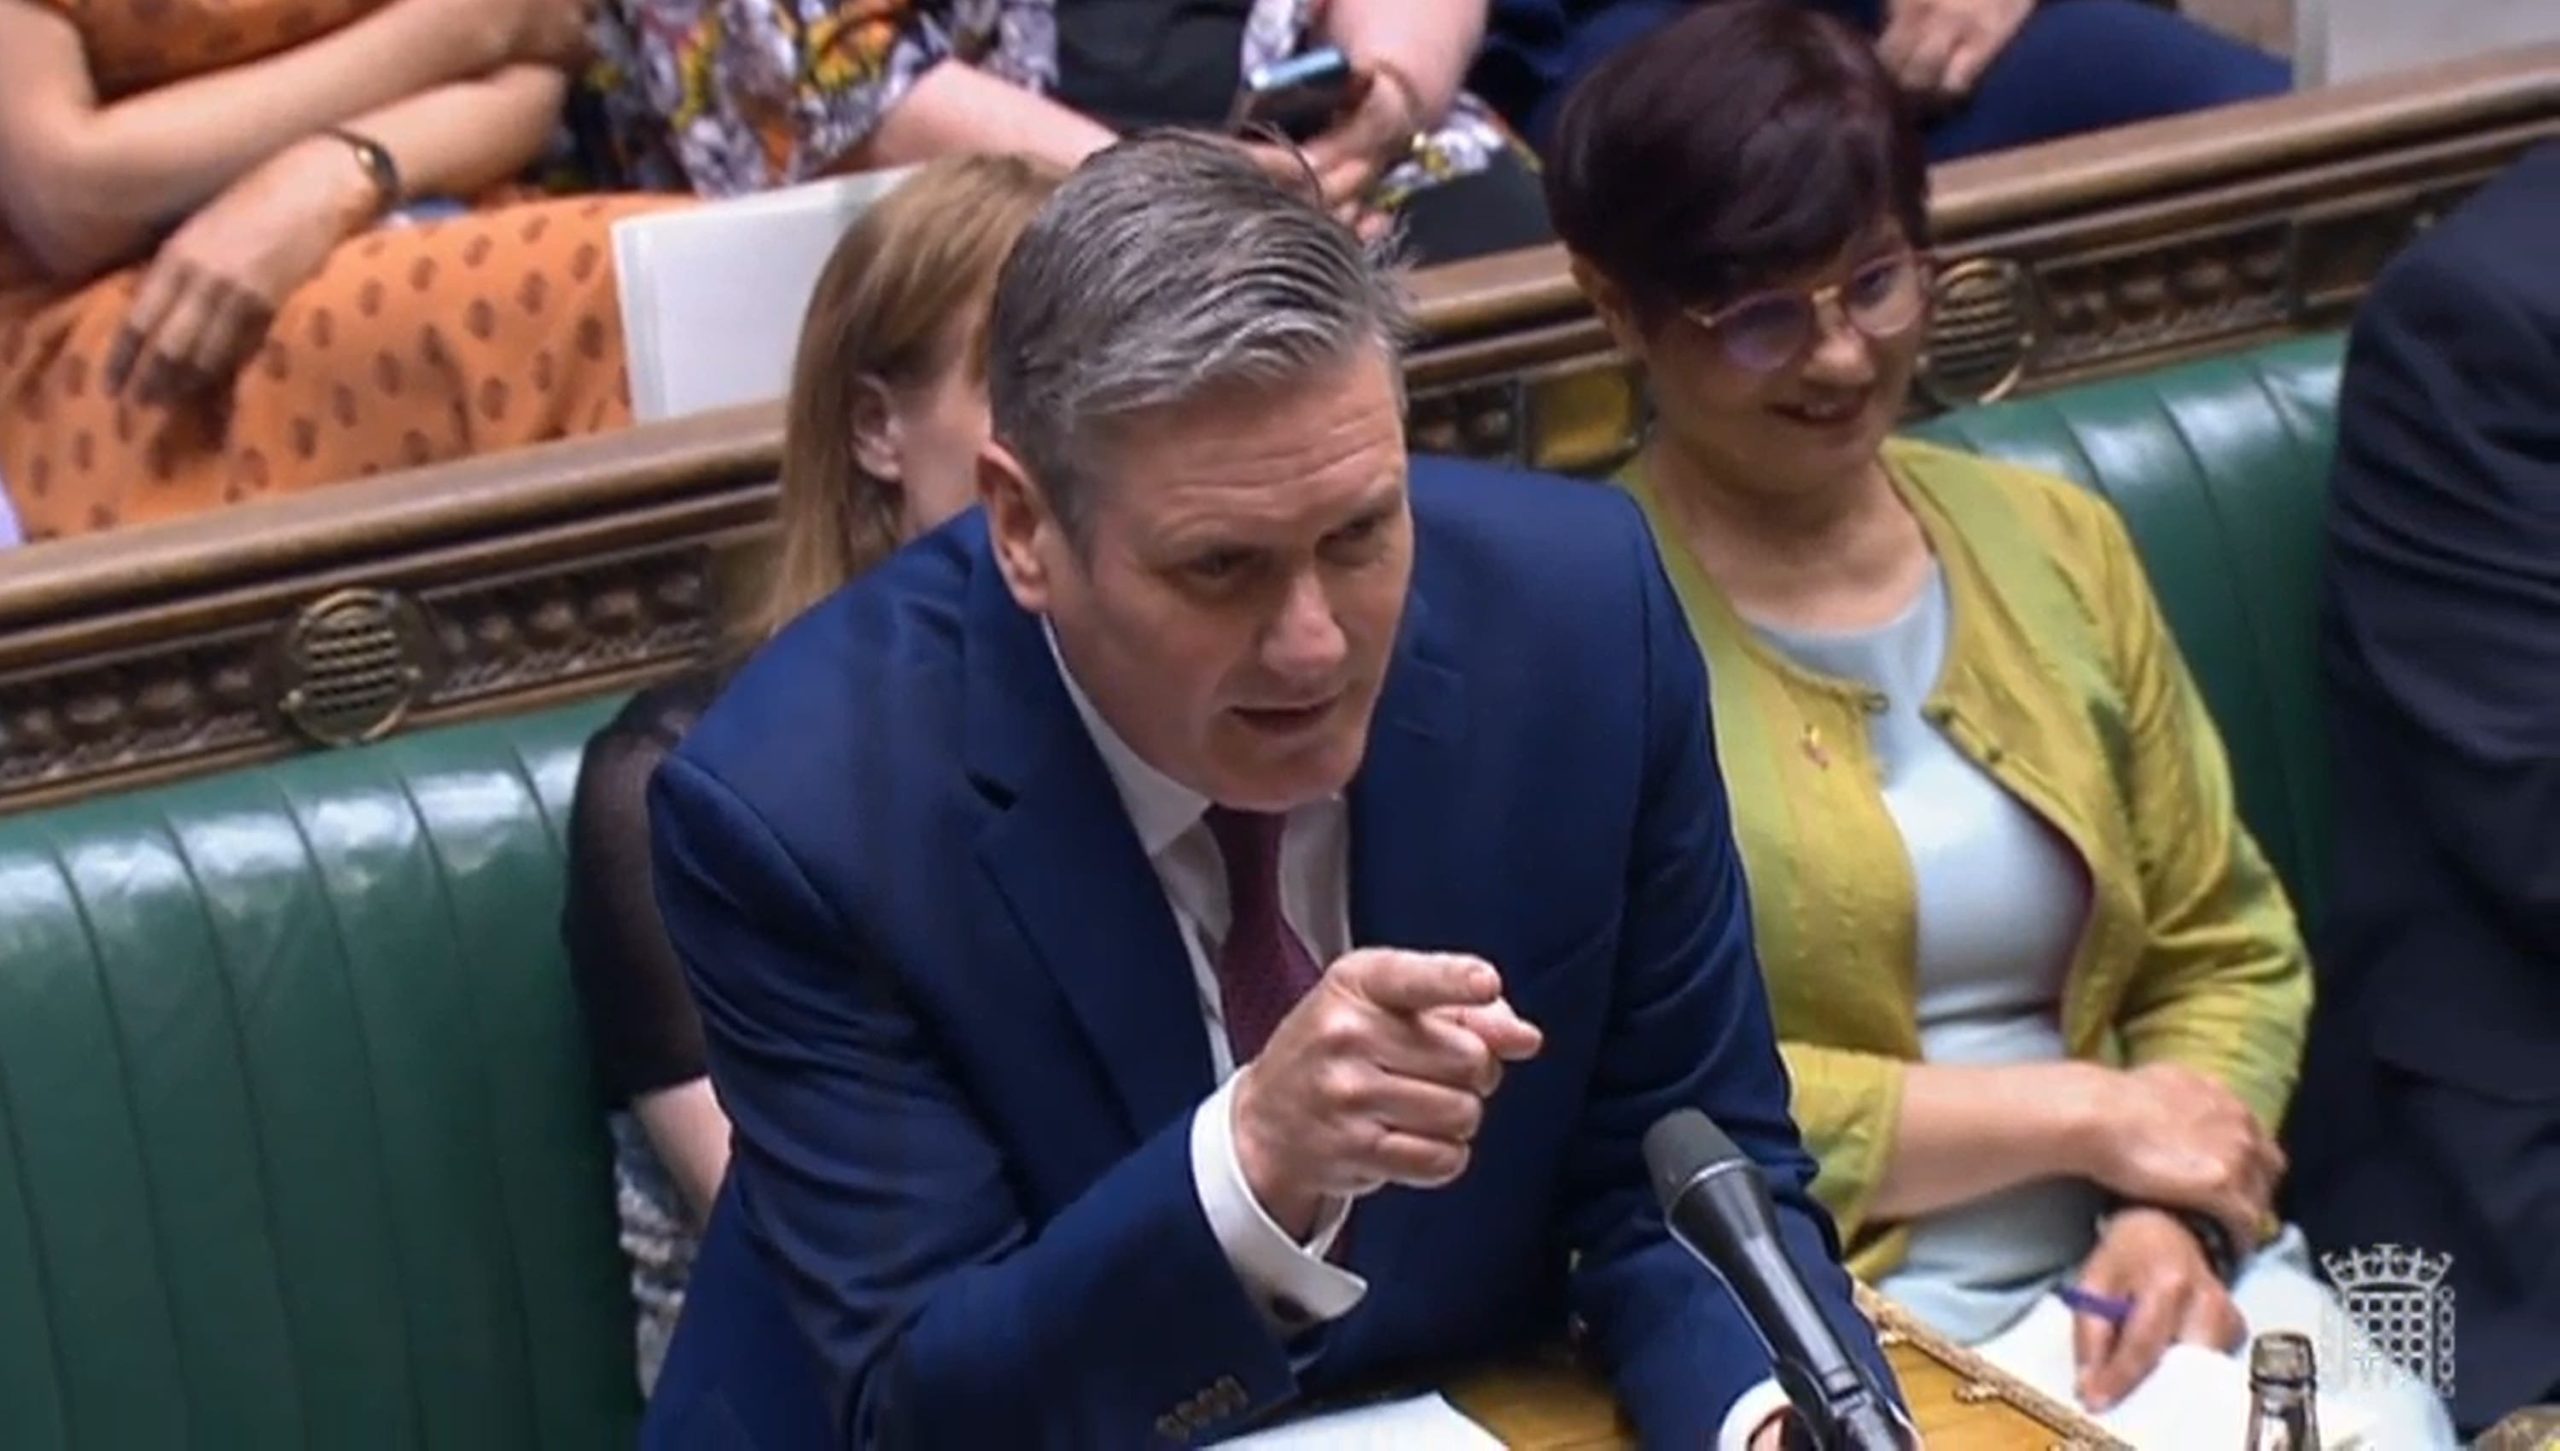 Starmer opens PMQs with Christmas book gag